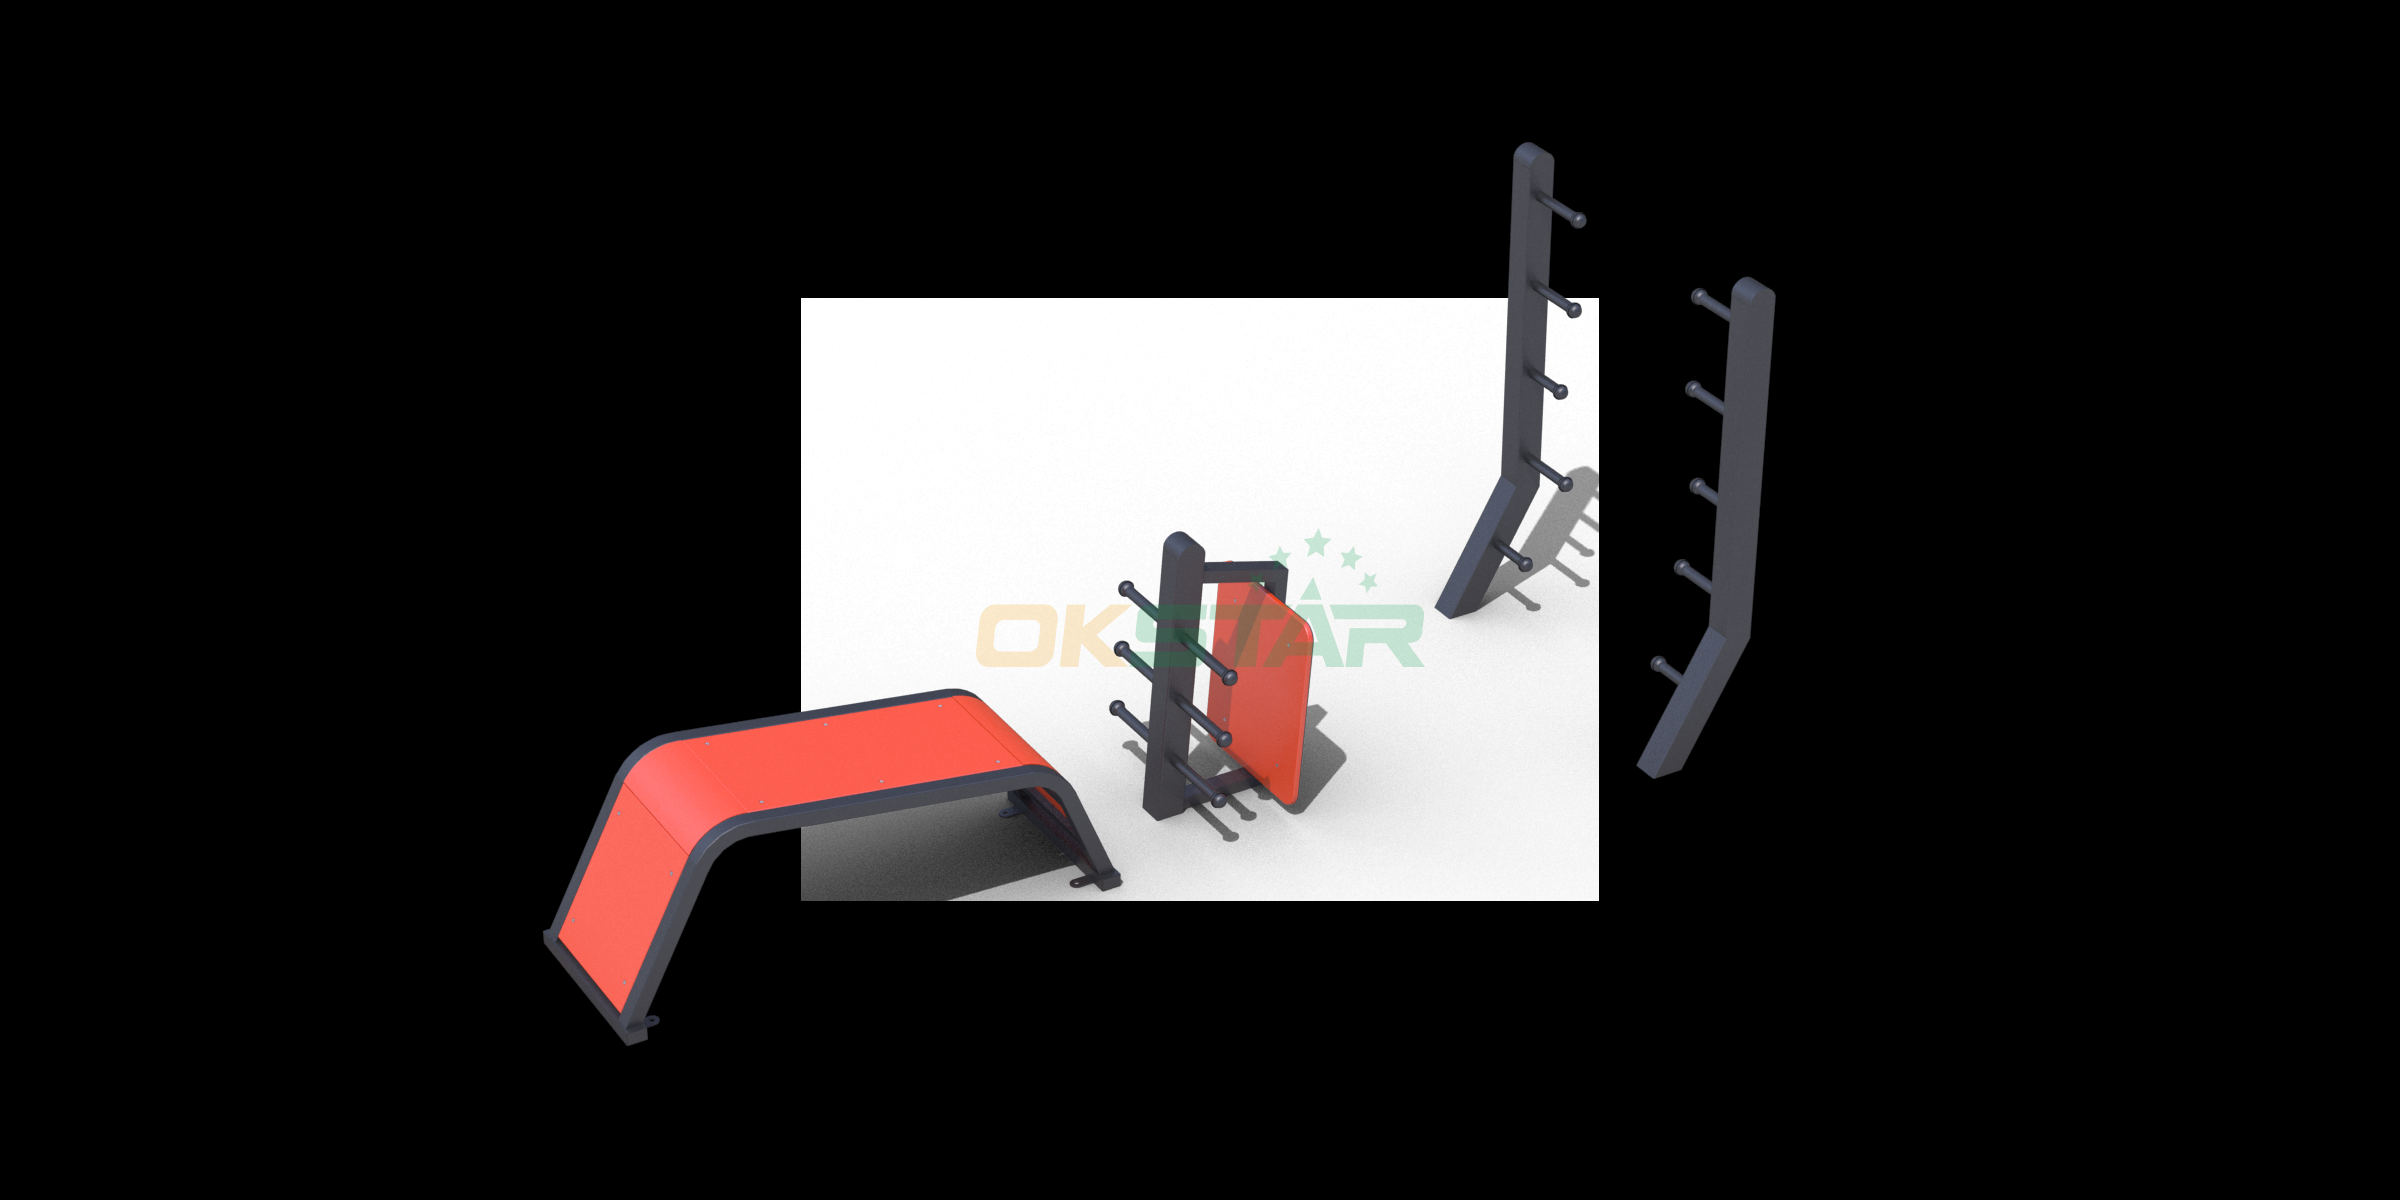 OK-F03B	 Push-up rack and side body trainer